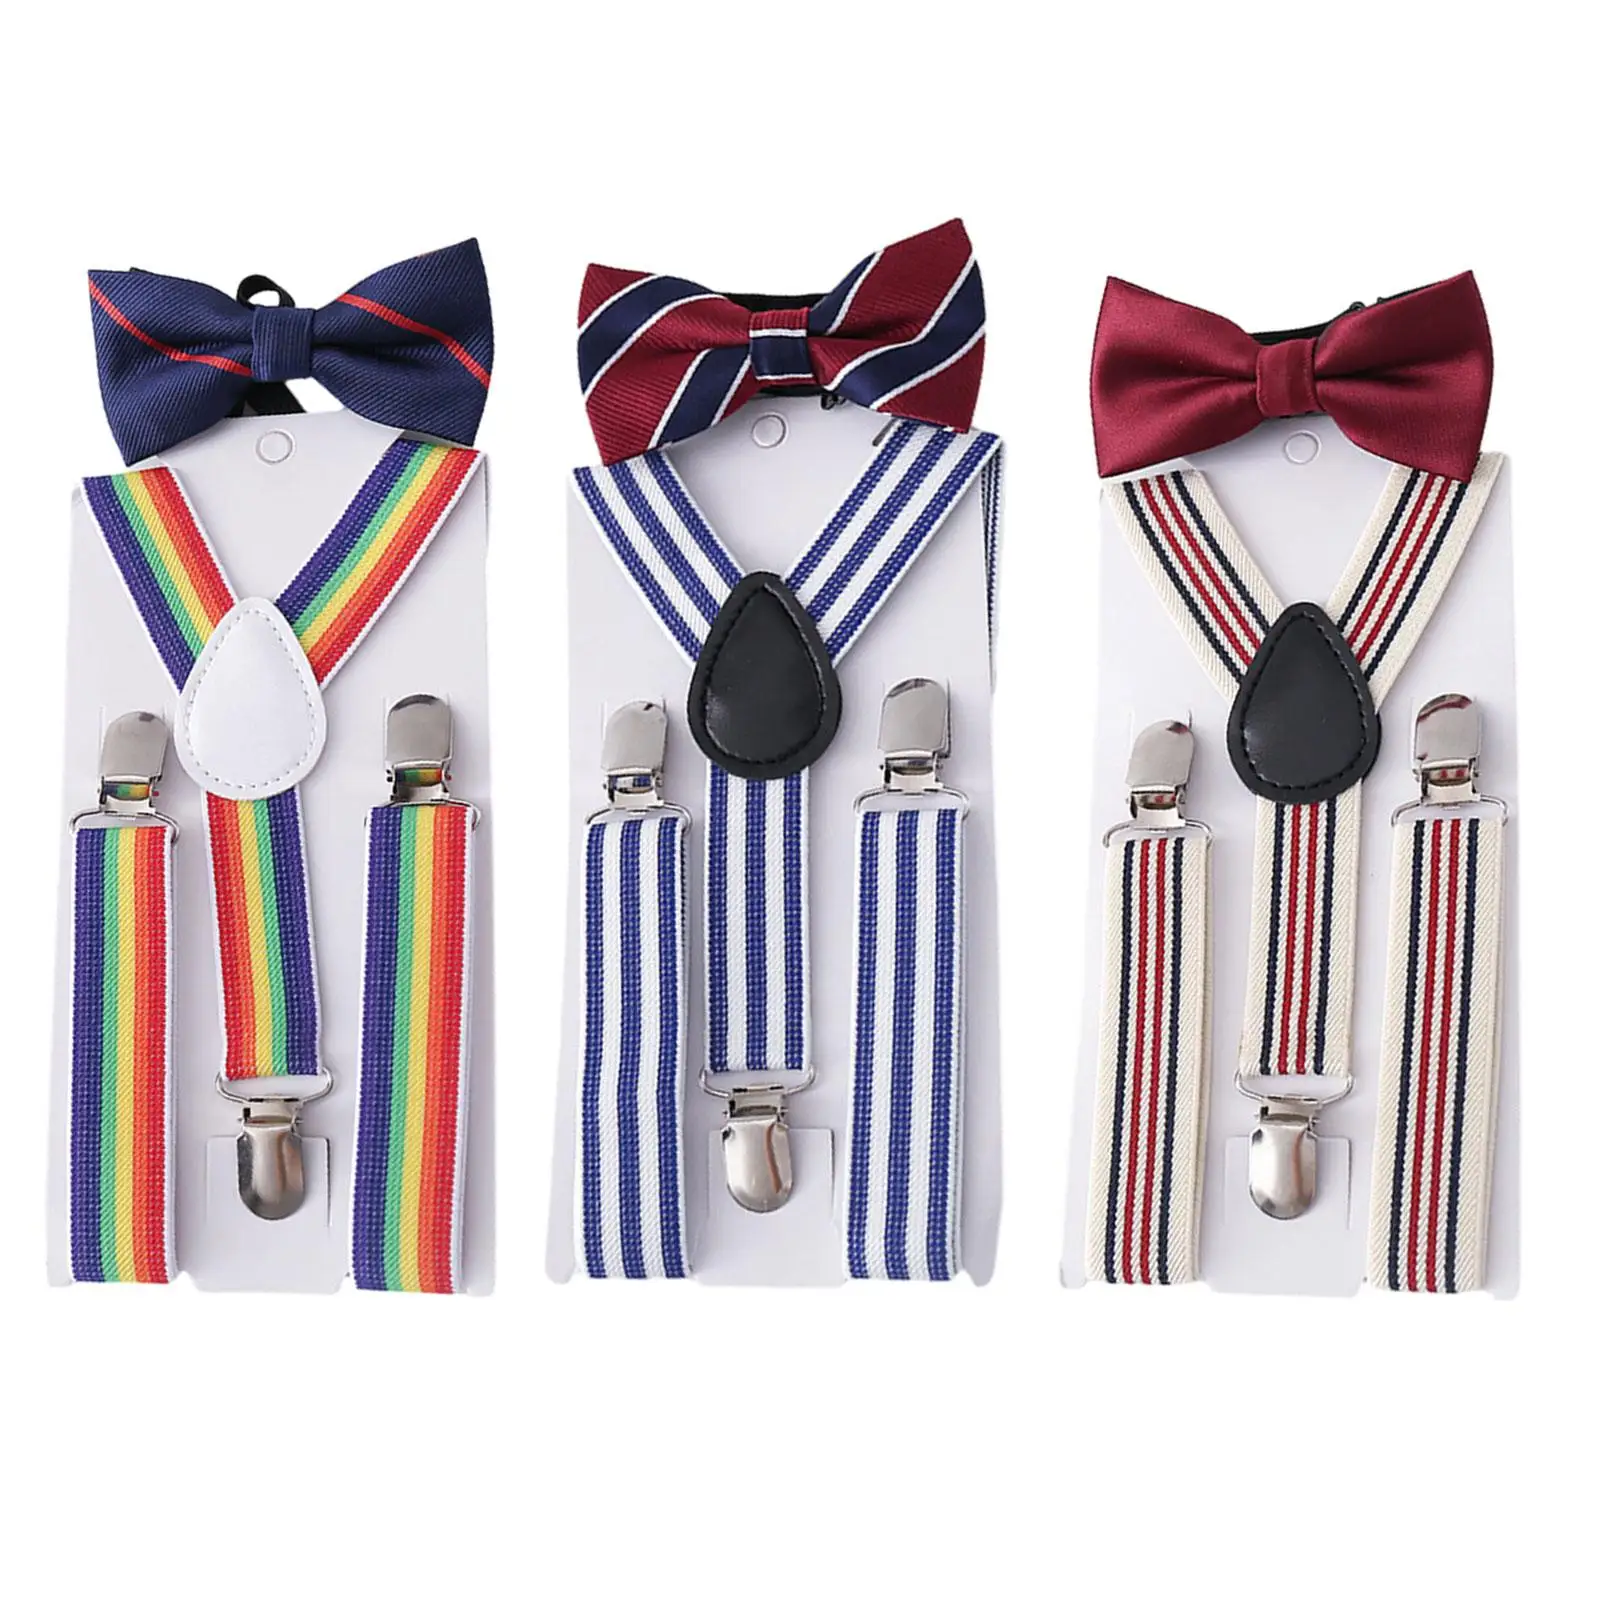 Kids Suspender Bow Tie Set with Clips Elastic Straps Tuxedo Suspenders Y Shape Braces for Trousers Wedding Jeans Cosplay Party